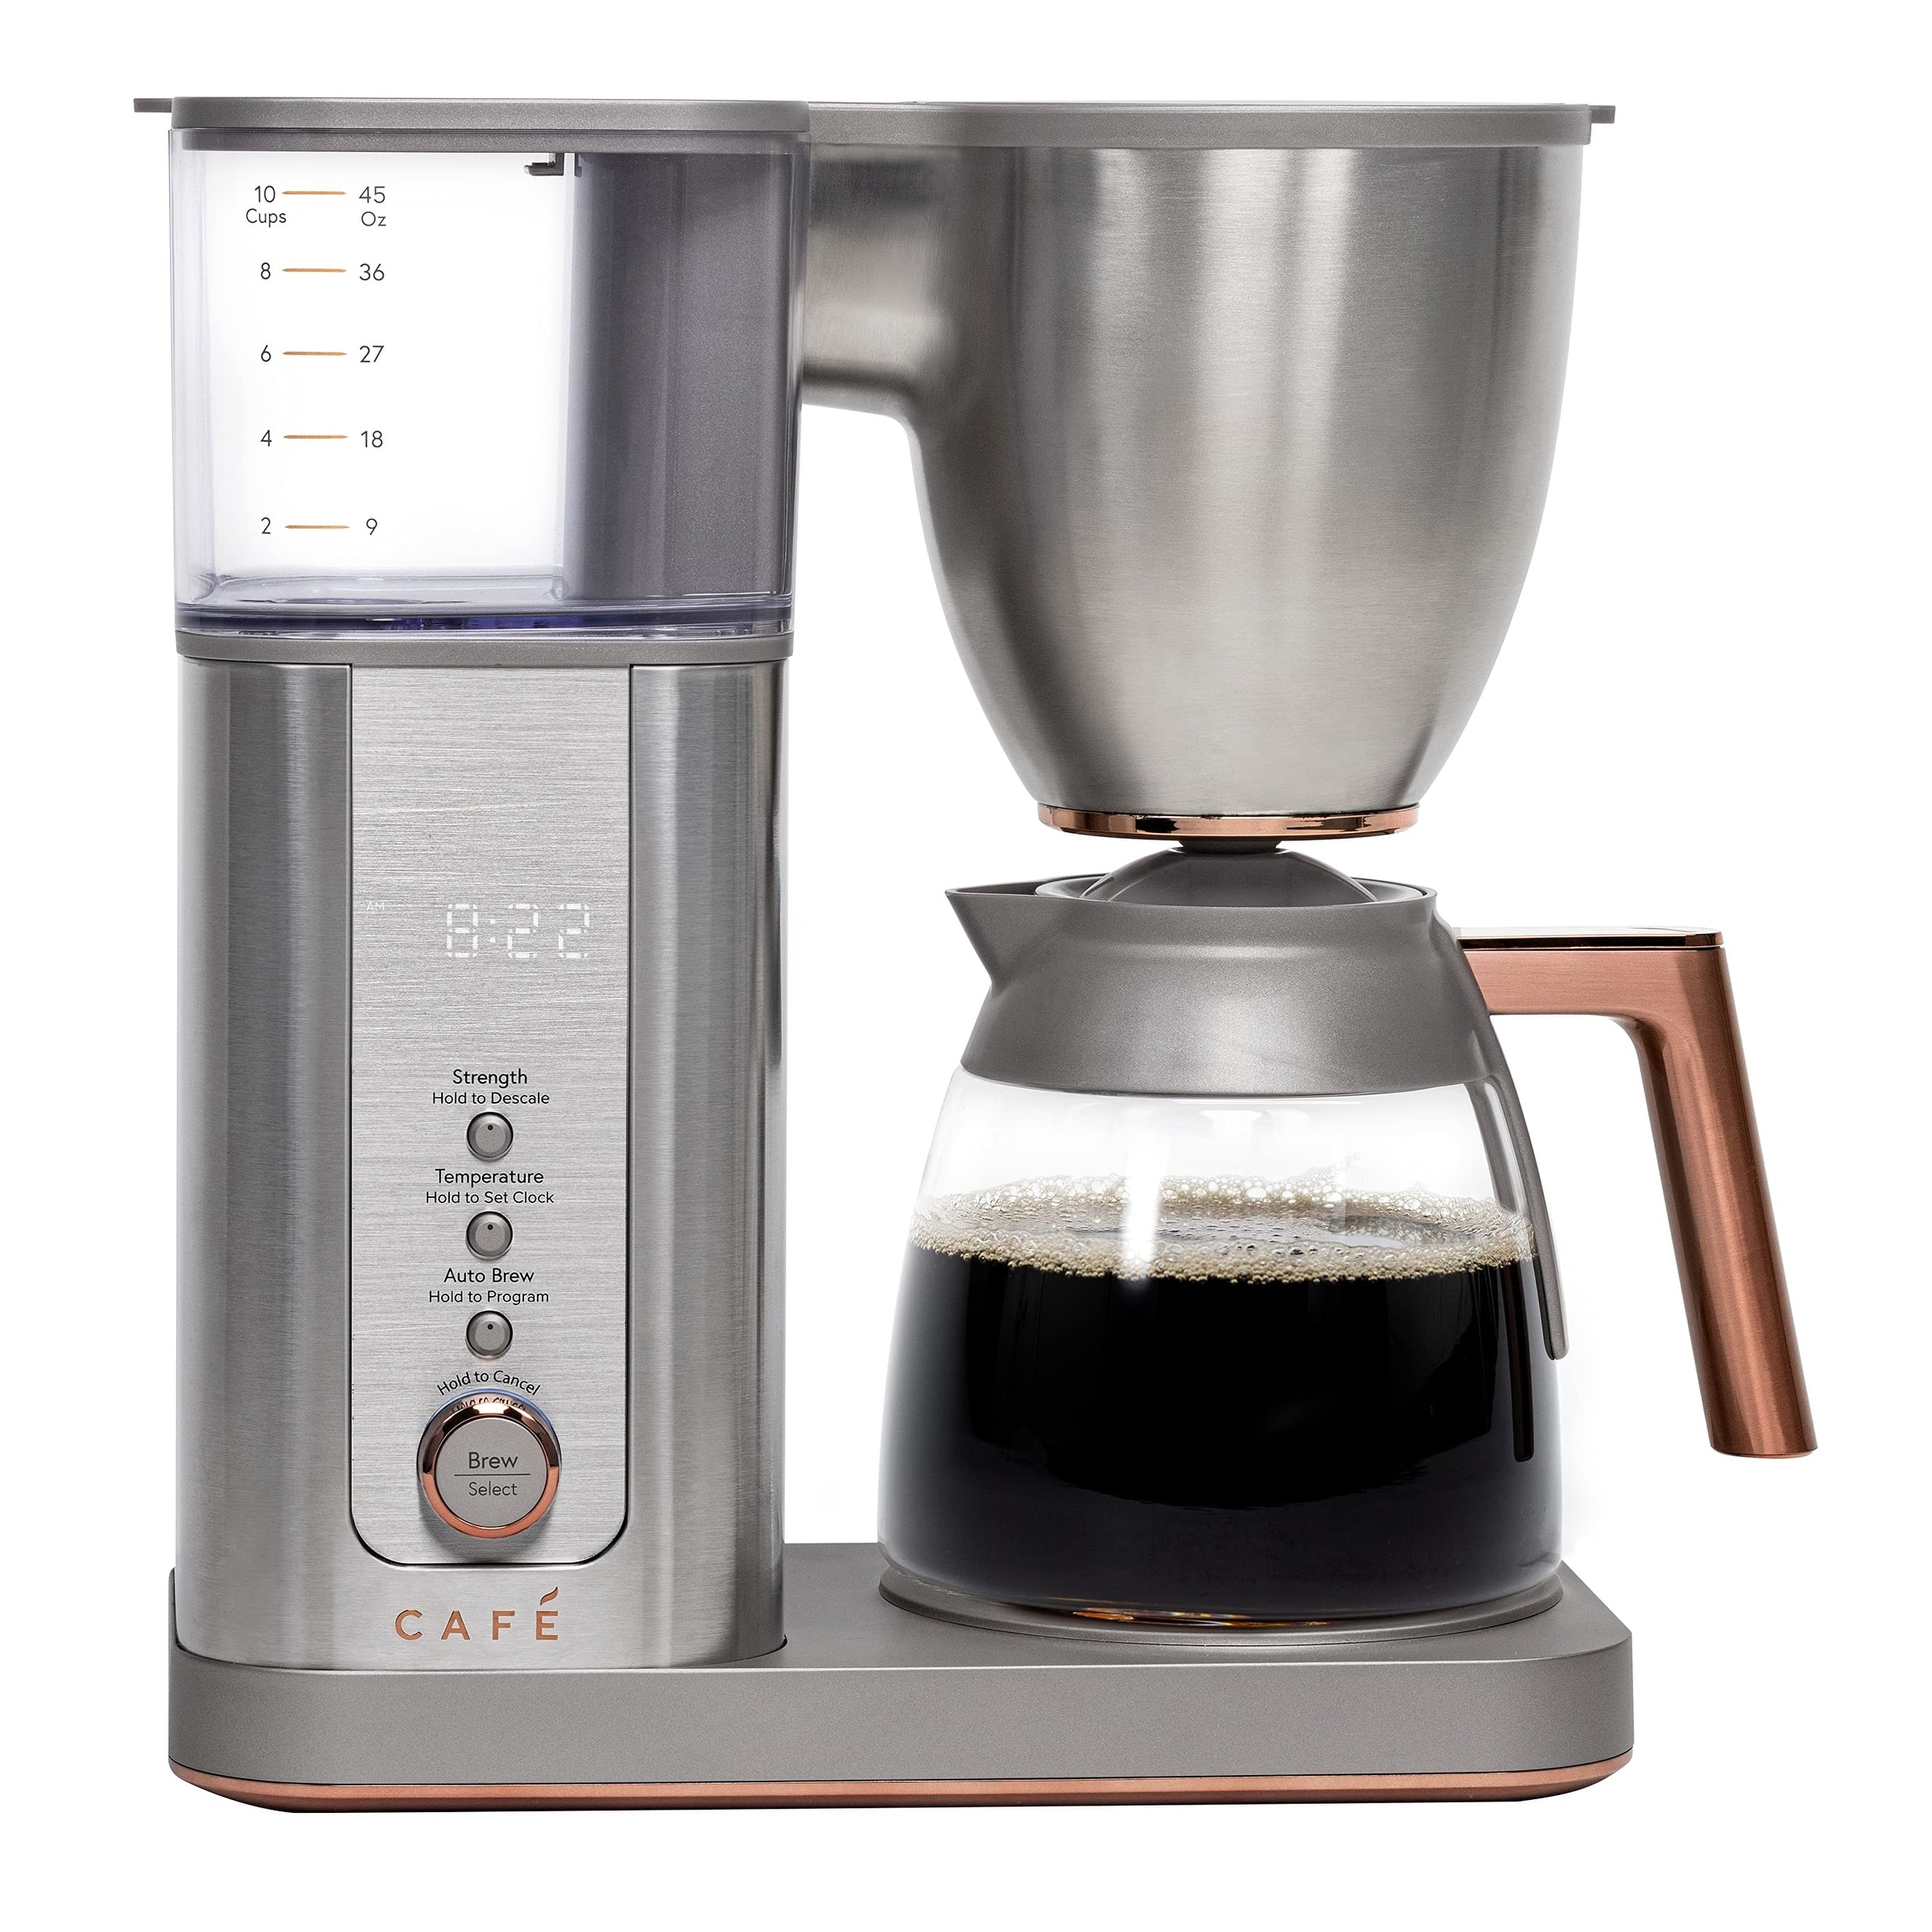 https://ak1.ostkcdn.com/images/products/is/images/direct/411866b0adc264eac91390daa9a13e33176c28b1/Specialty-Drip-Coffee-Maker-10-Cup-Glass-Carafe-WiFi-Enabled-Voice-to-Brew-Technology-Smart-Kitchen-Essentials-SCA-Certified.jpg